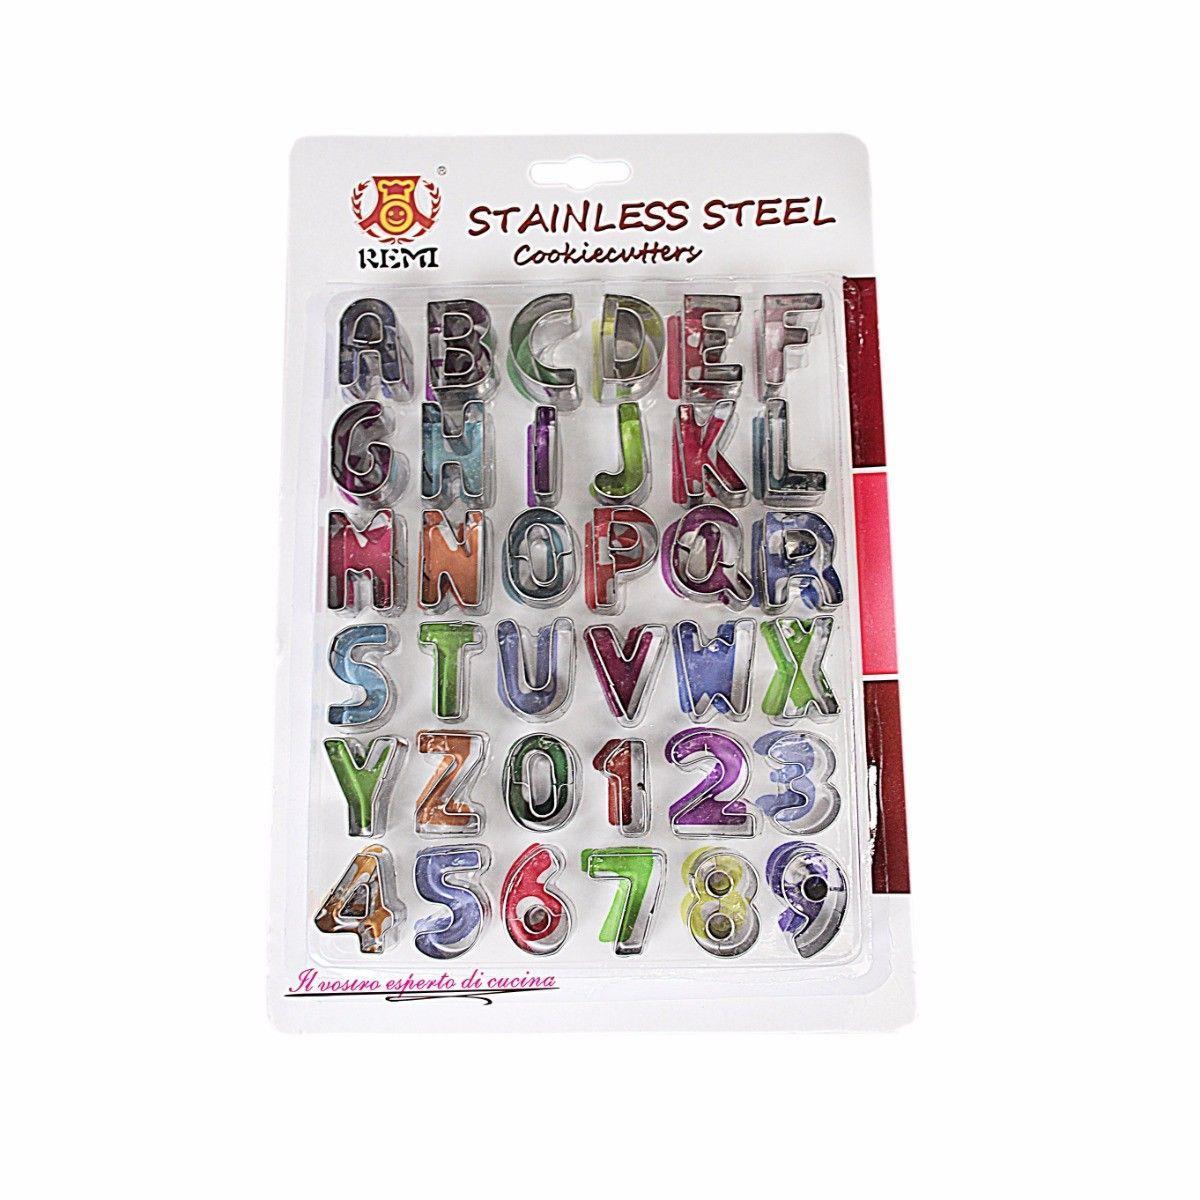 Stainless Steel Cookie Cutters In Alphabet Shapes and Numbers 1-9 6007 (Large Letter Rate)